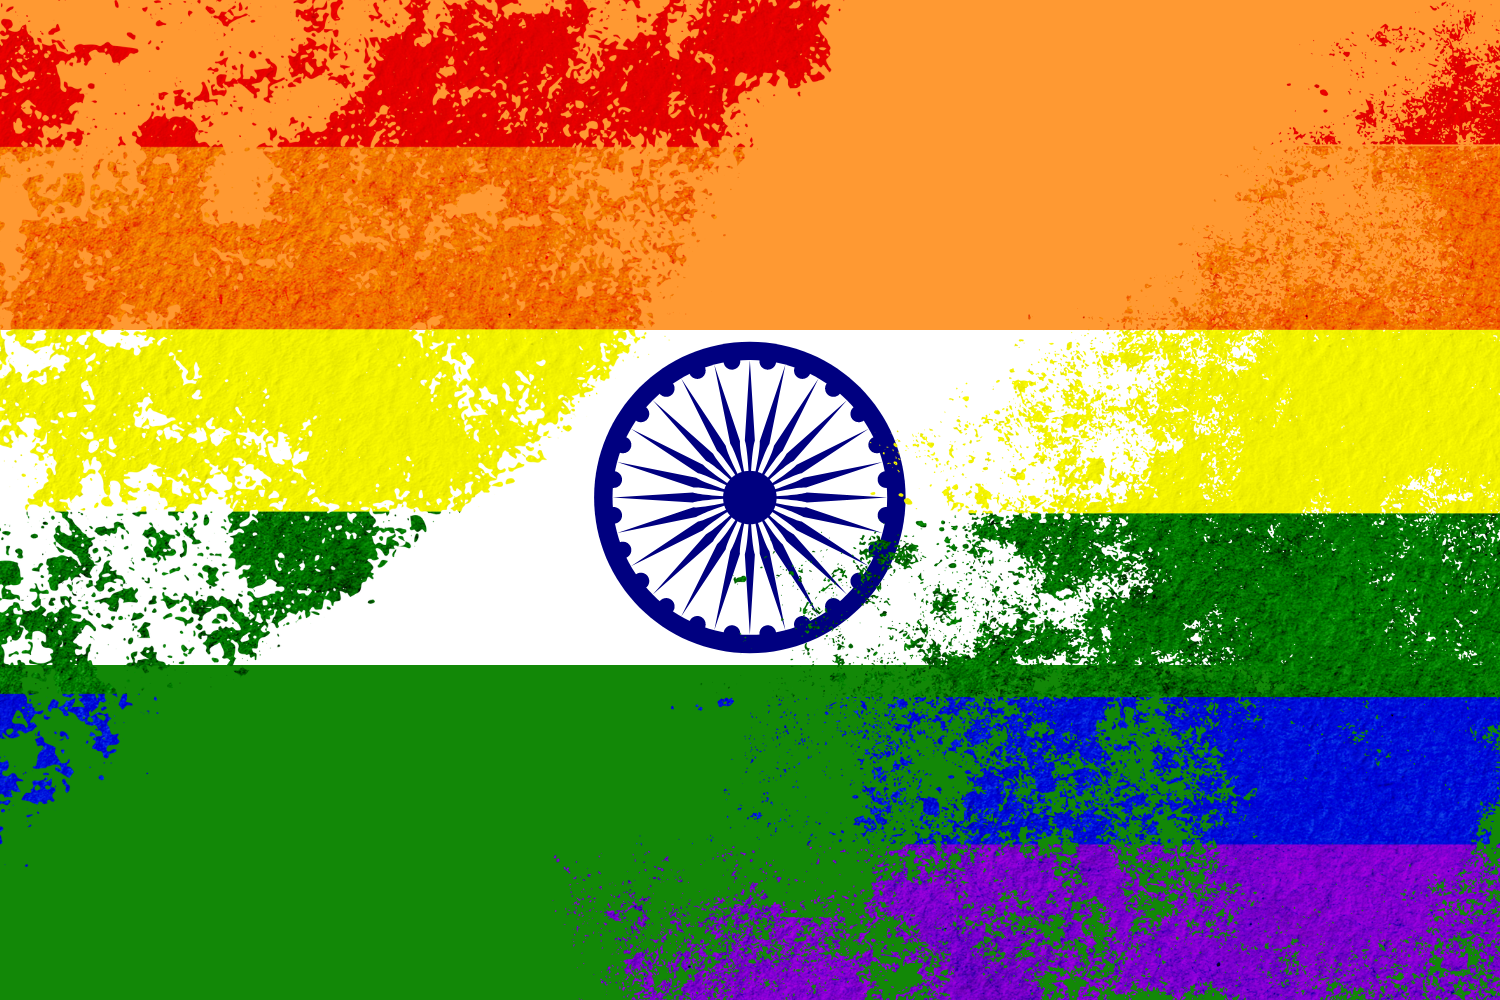 Graphic depicting the national flag of India and the LGBTQIA+ pride flag  
(Hustler Multimedia/Lexie Perez).
